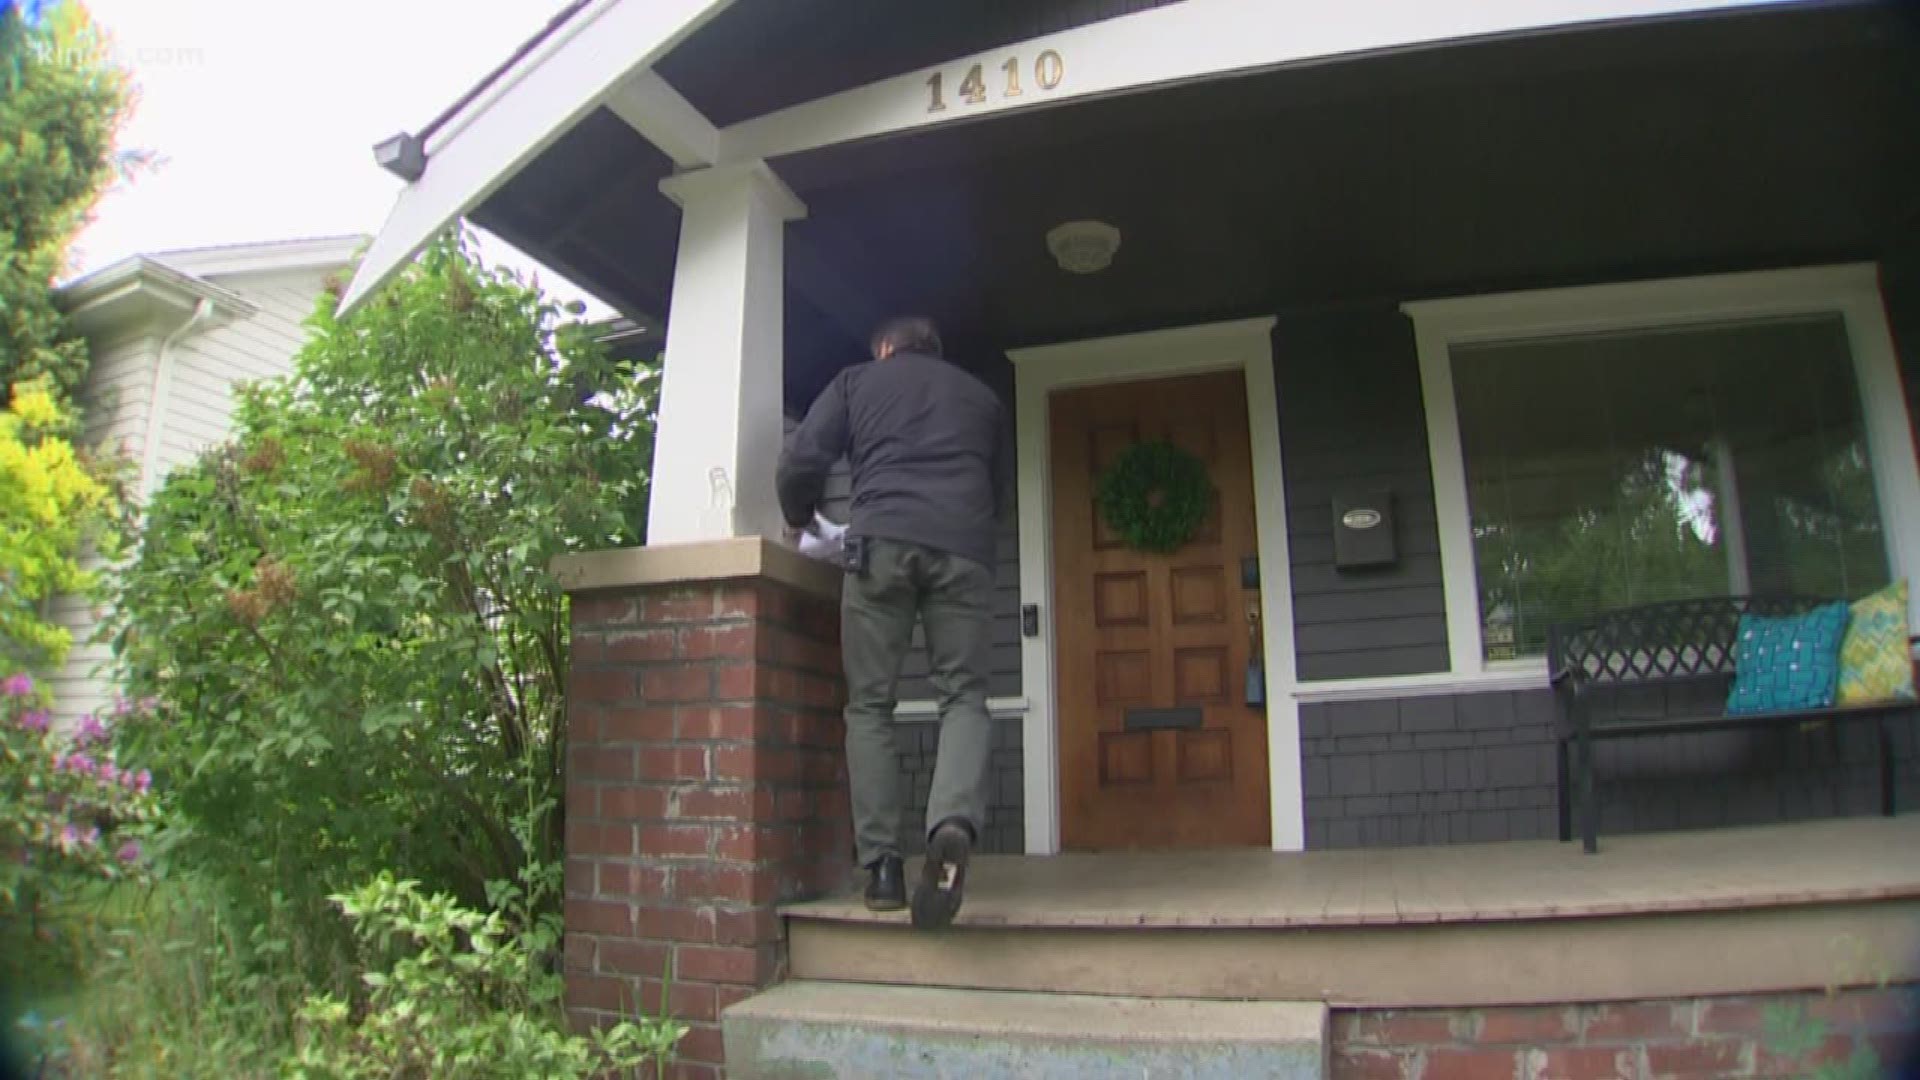 A new Redfin study found Tacoma is the hottest housing market in the nation this spring. KING 5's Michael Crowe reports